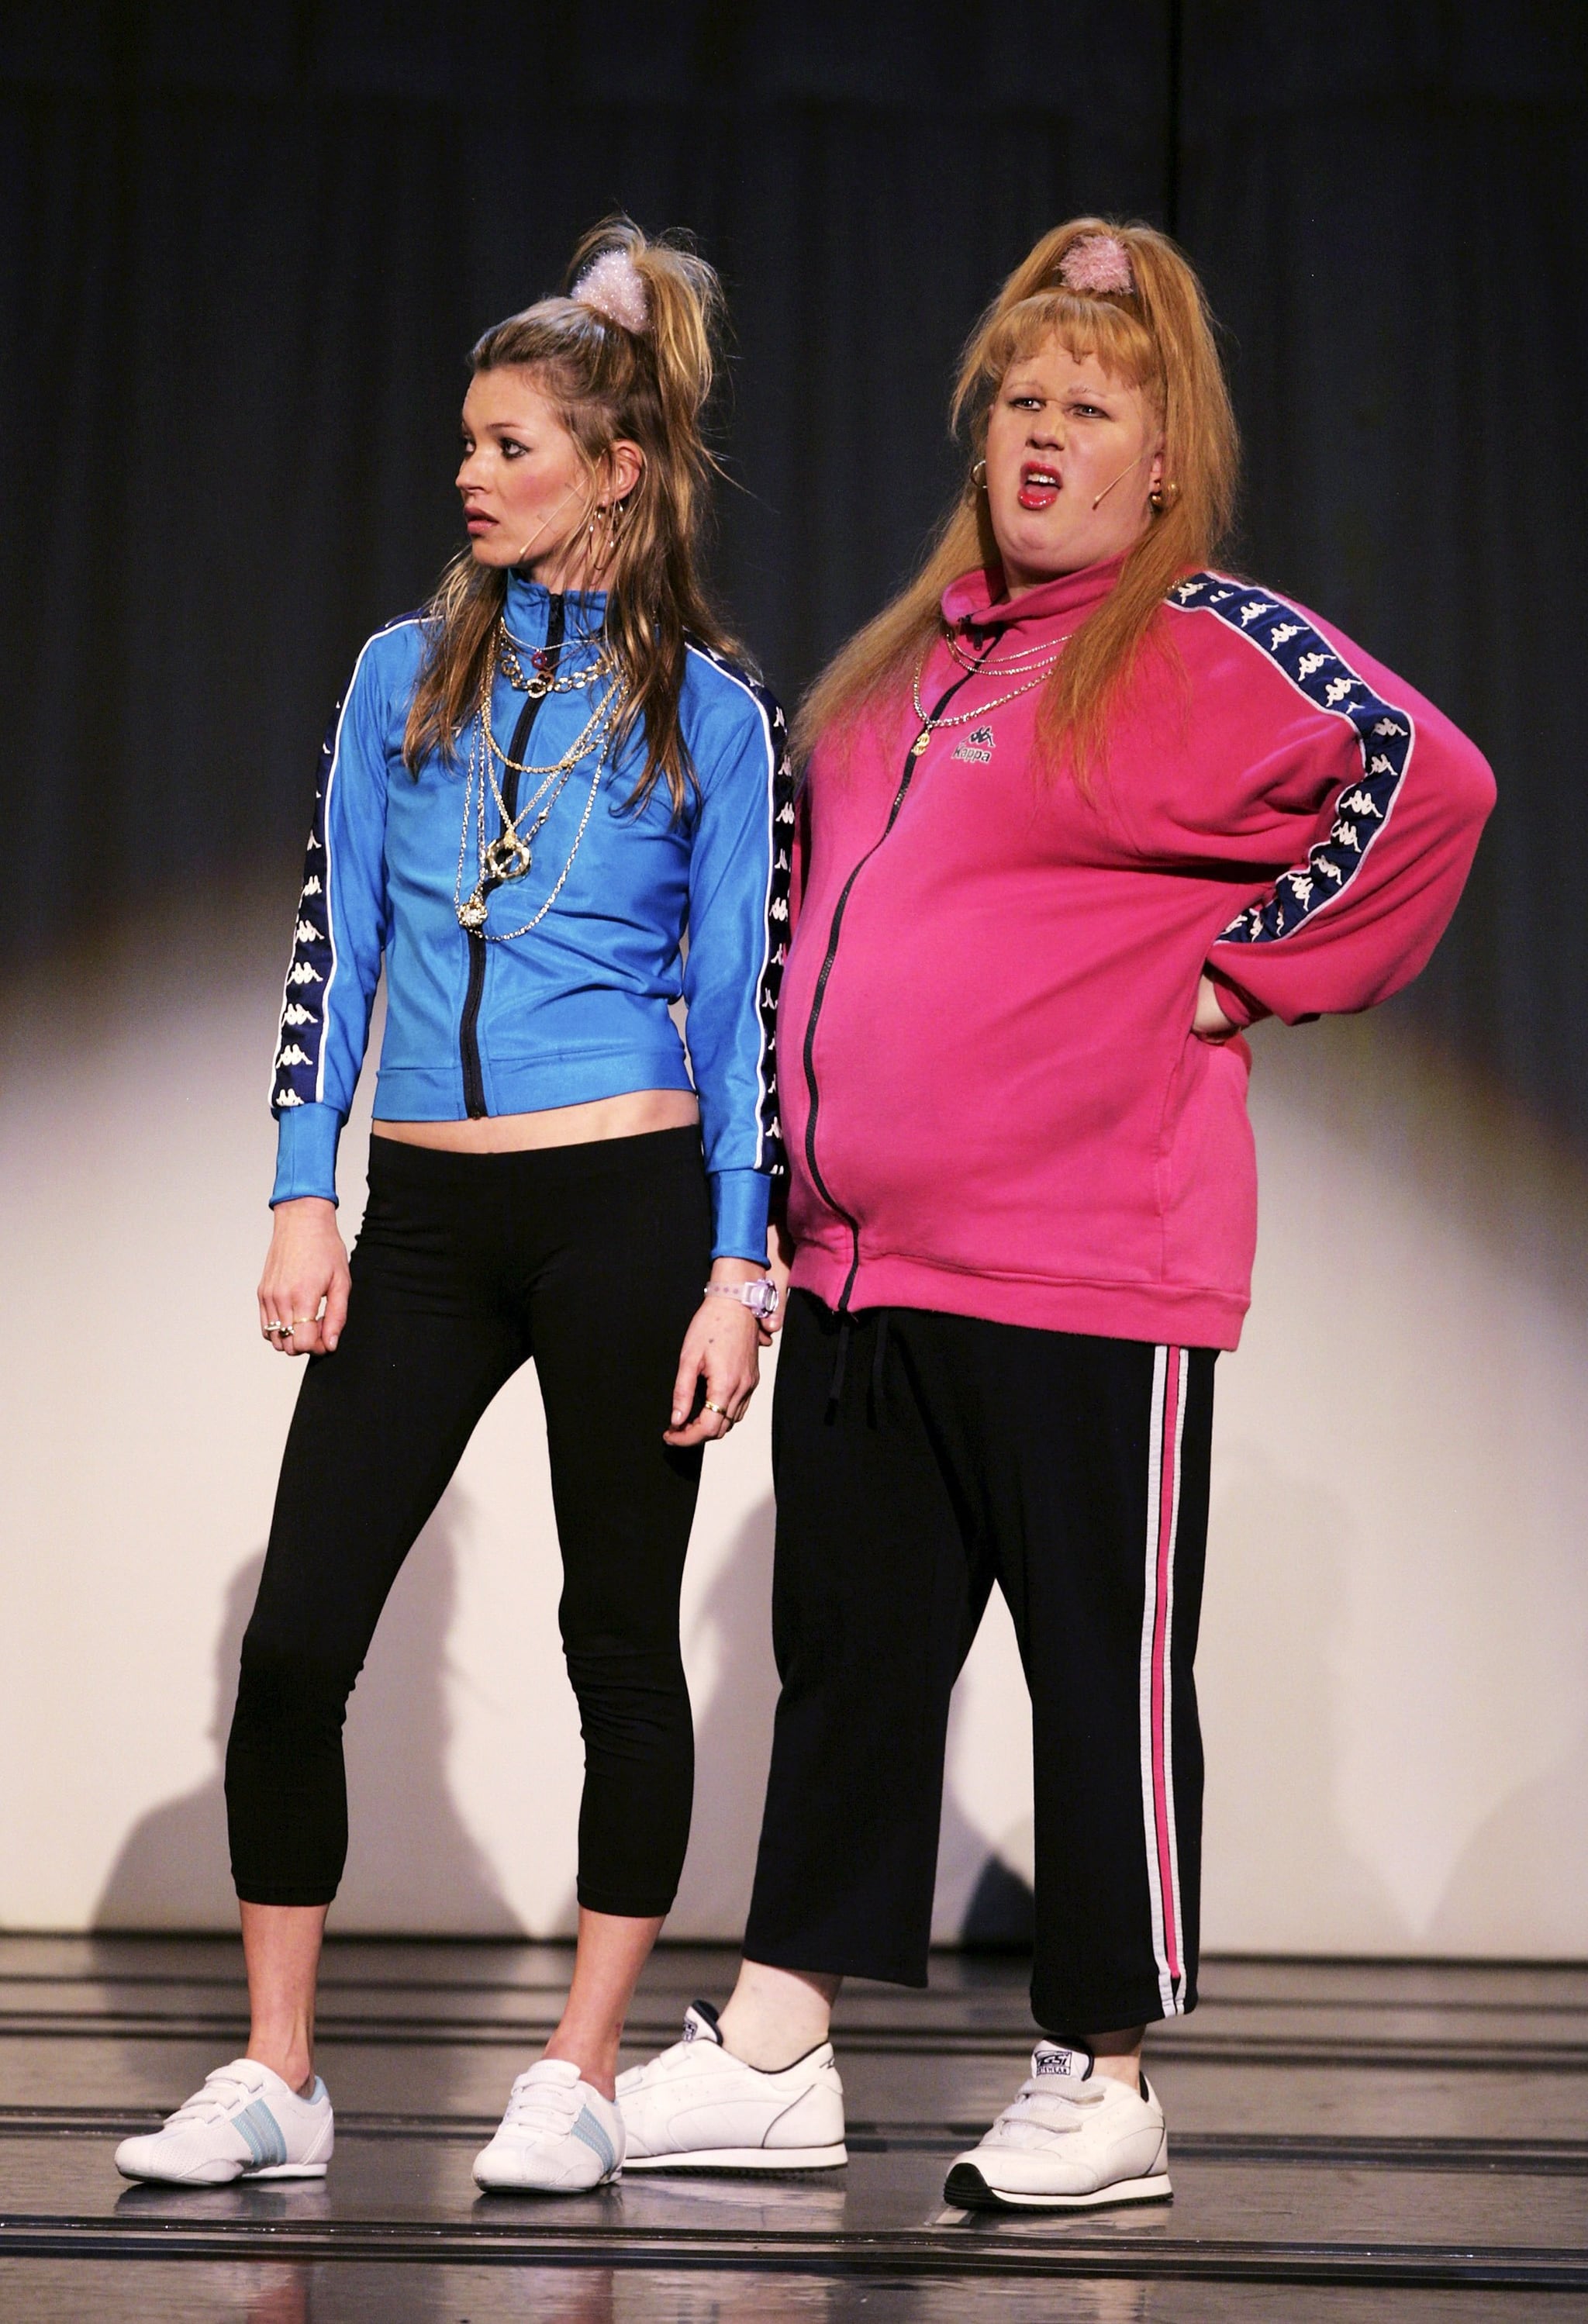 LONDON - NOVEMBER 22: Model Kate Moss (L) and Matt Lucas, as the Pollard sisters Katie and Vicky, perform onstage at 